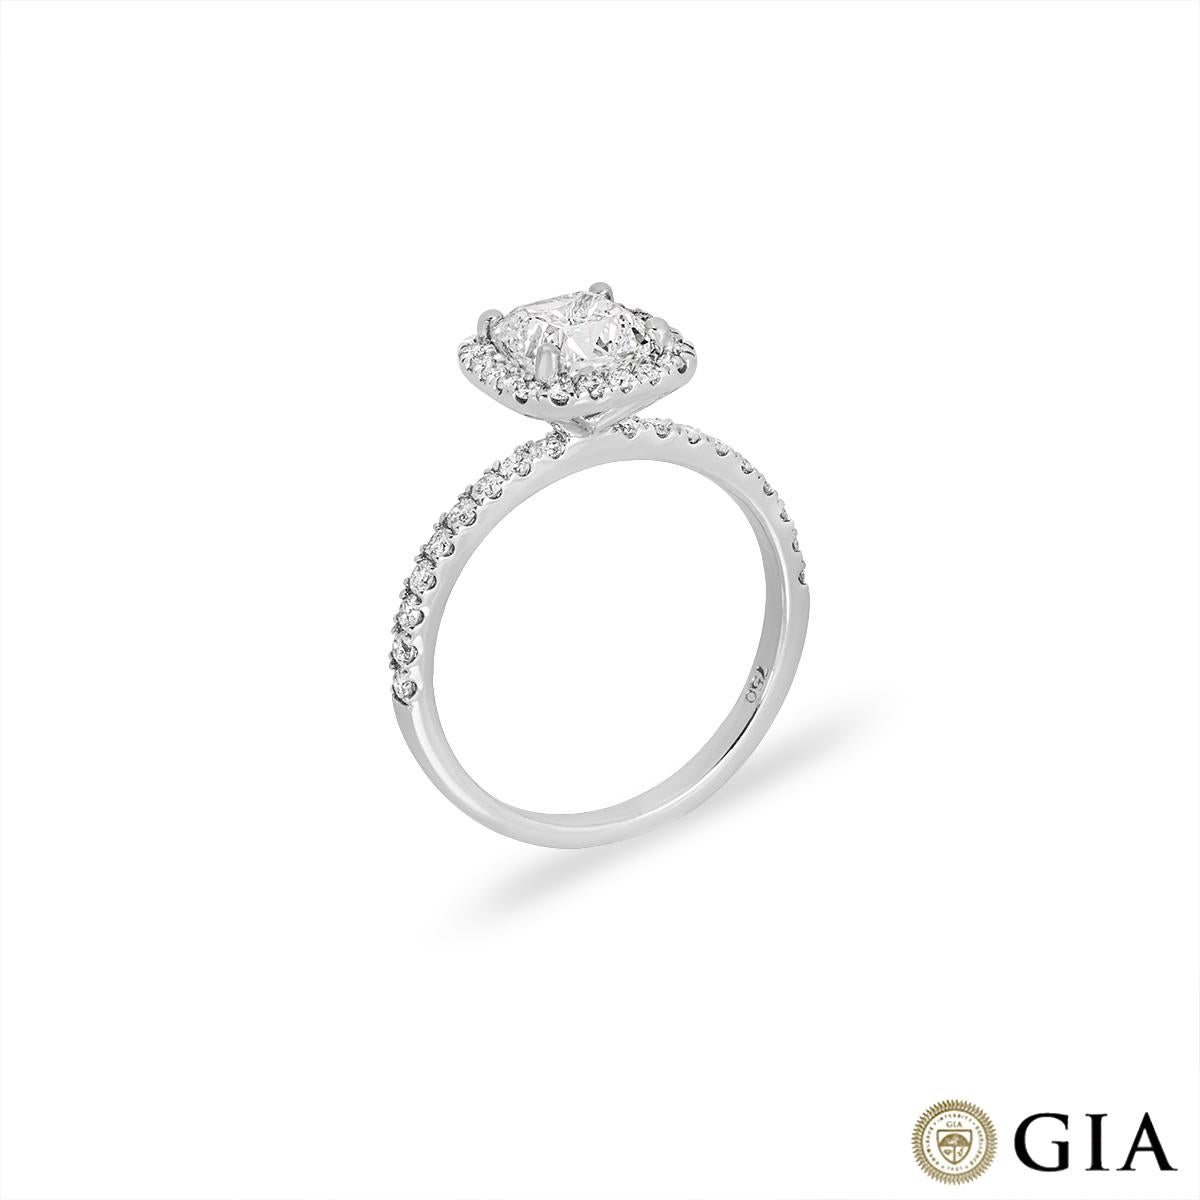 An enchanting 18k white gold diamond engagement ring. The ring features a cushion cut diamond set to the centre of a halo weighing 1.51ct, F colour and VS2 clarity. Accentuating the centre stone are 38 round brilliant cut diamonds pave set to the